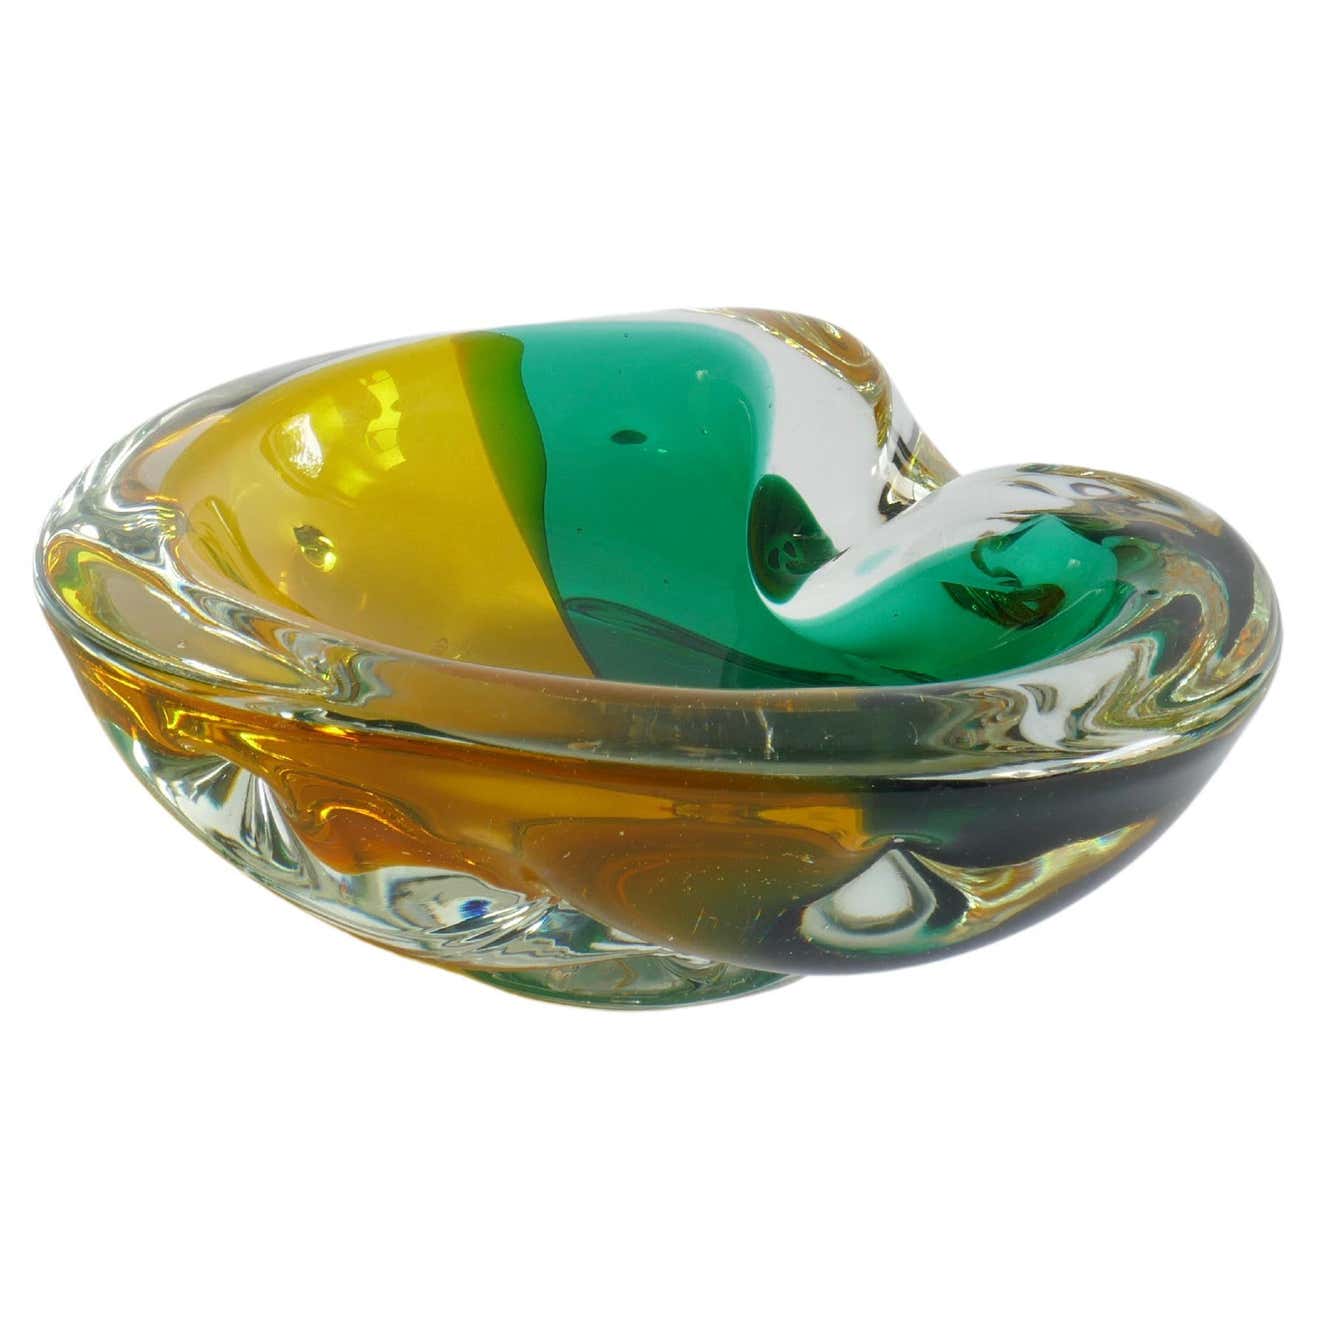 Sold - Green and Yellow Murano Sommerso Vide-Poche or Ashtray, 1960s